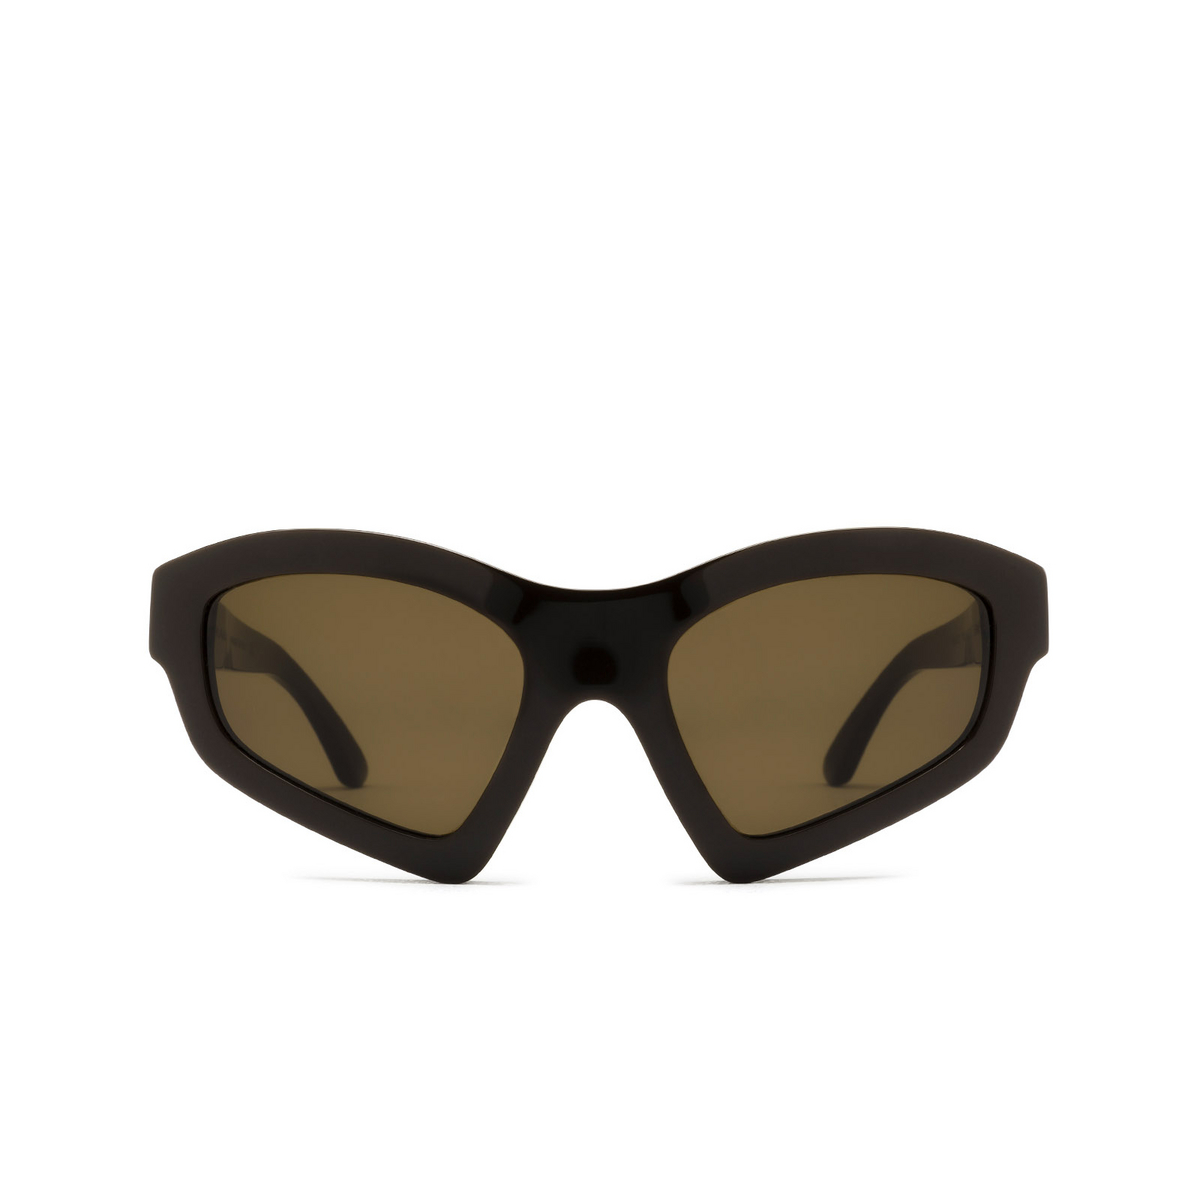 Huma® Cat-eye Sunglasses: Enne color Chocolate 22 - front view.